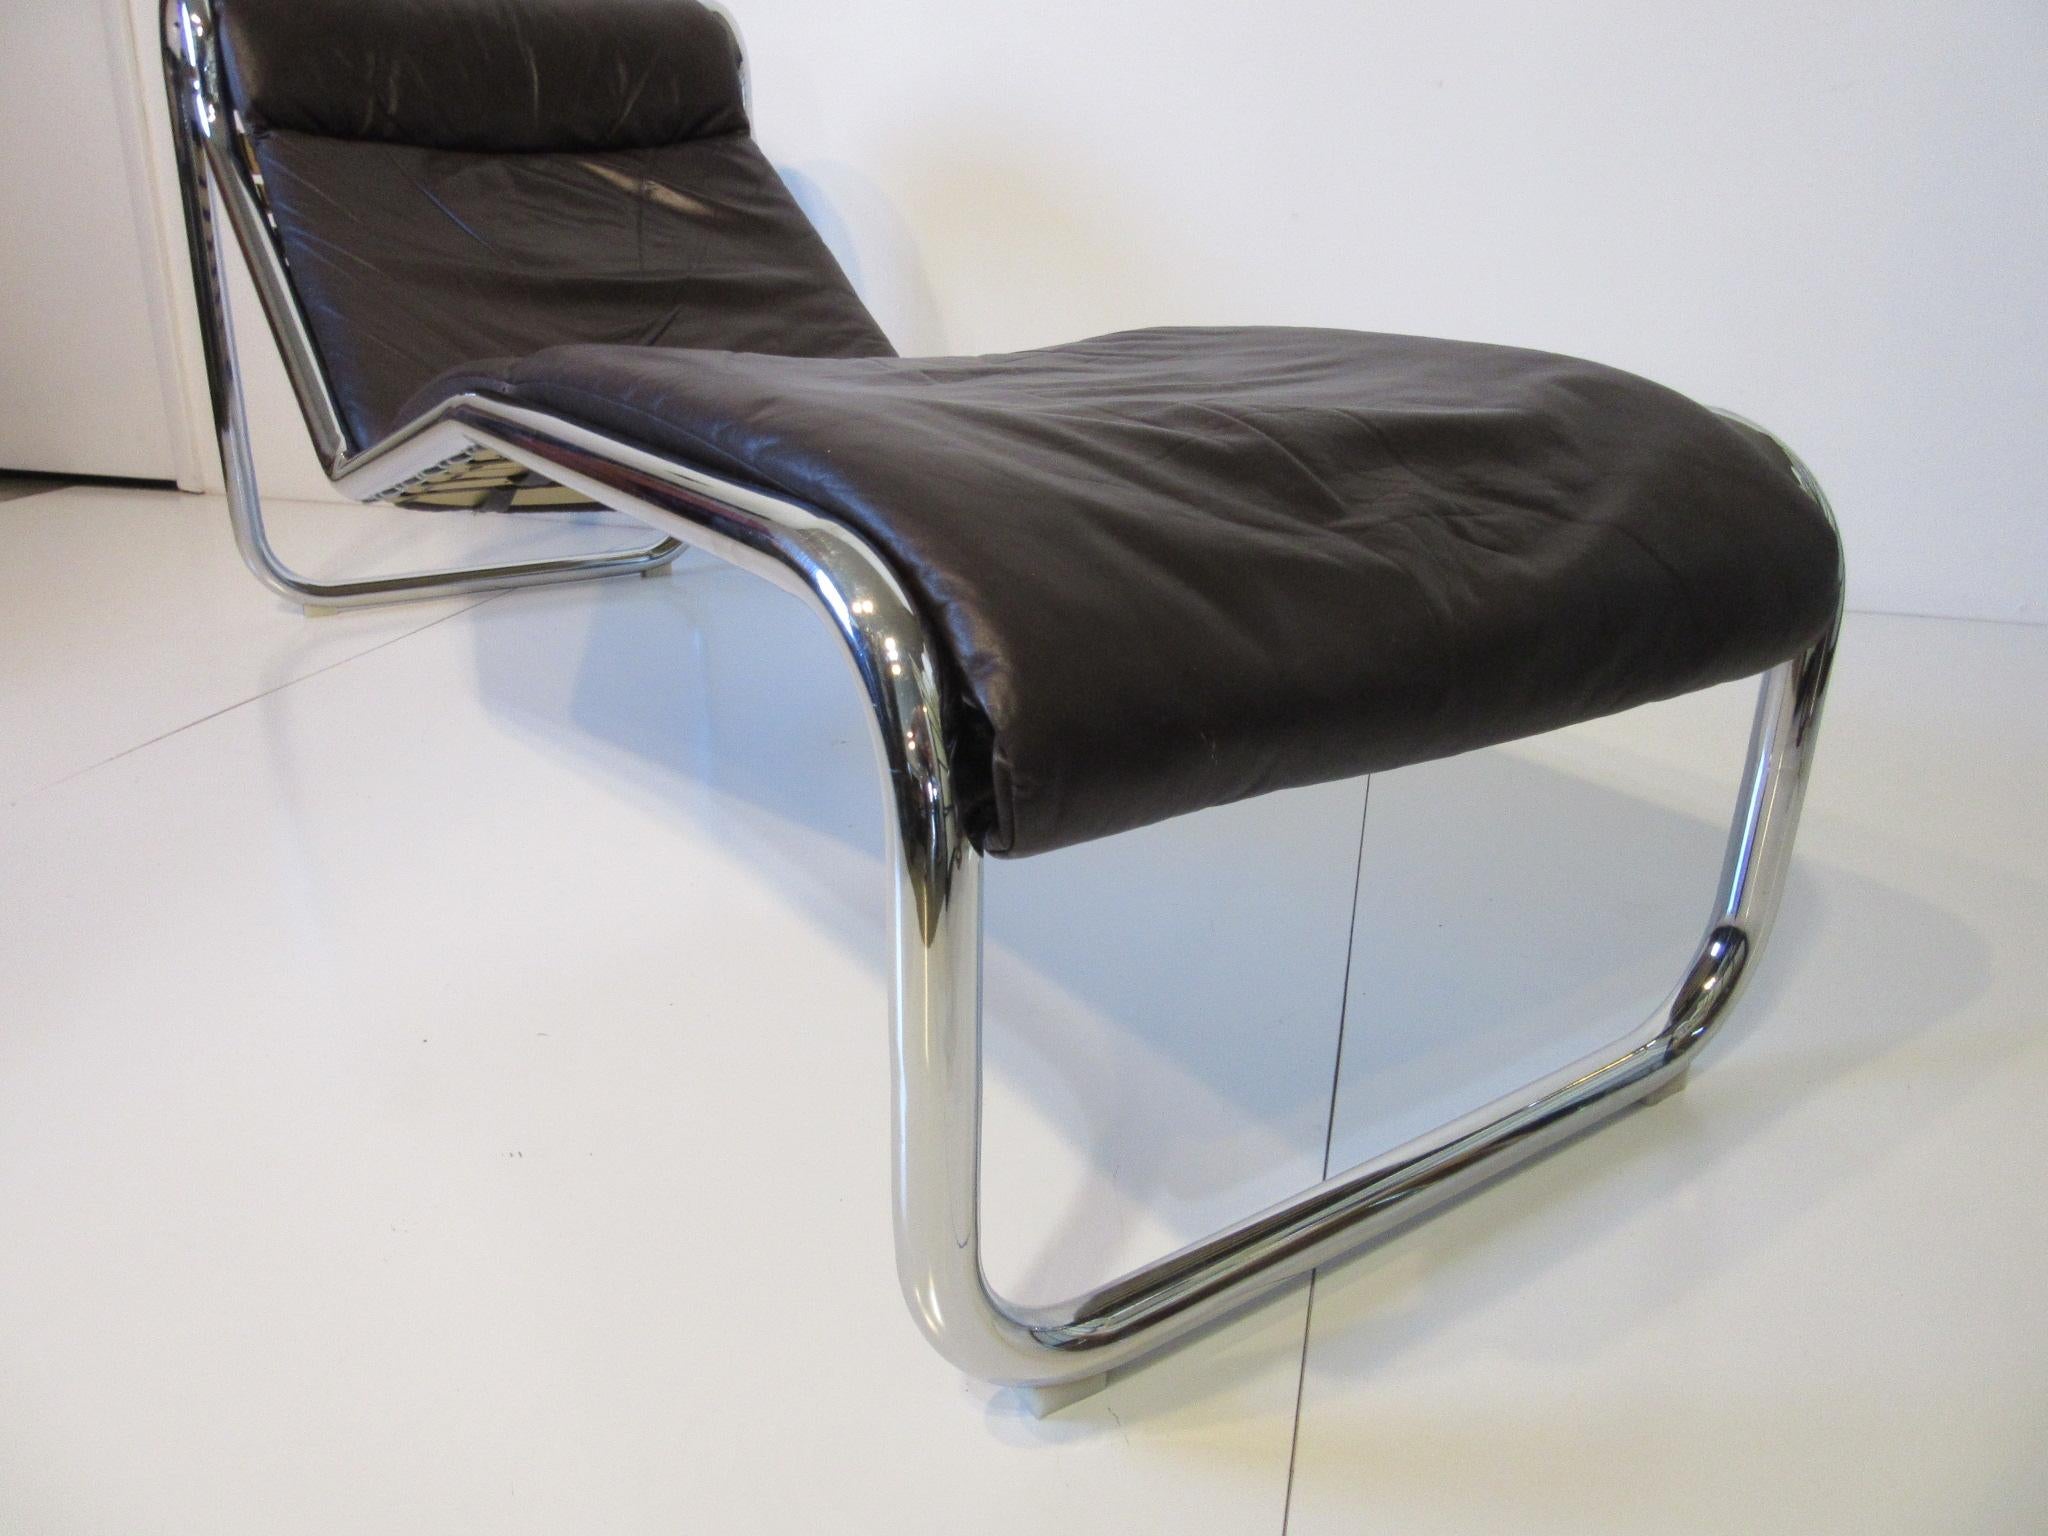 Modern Italian Leather / Chrome Chaise Lounger, Daybed